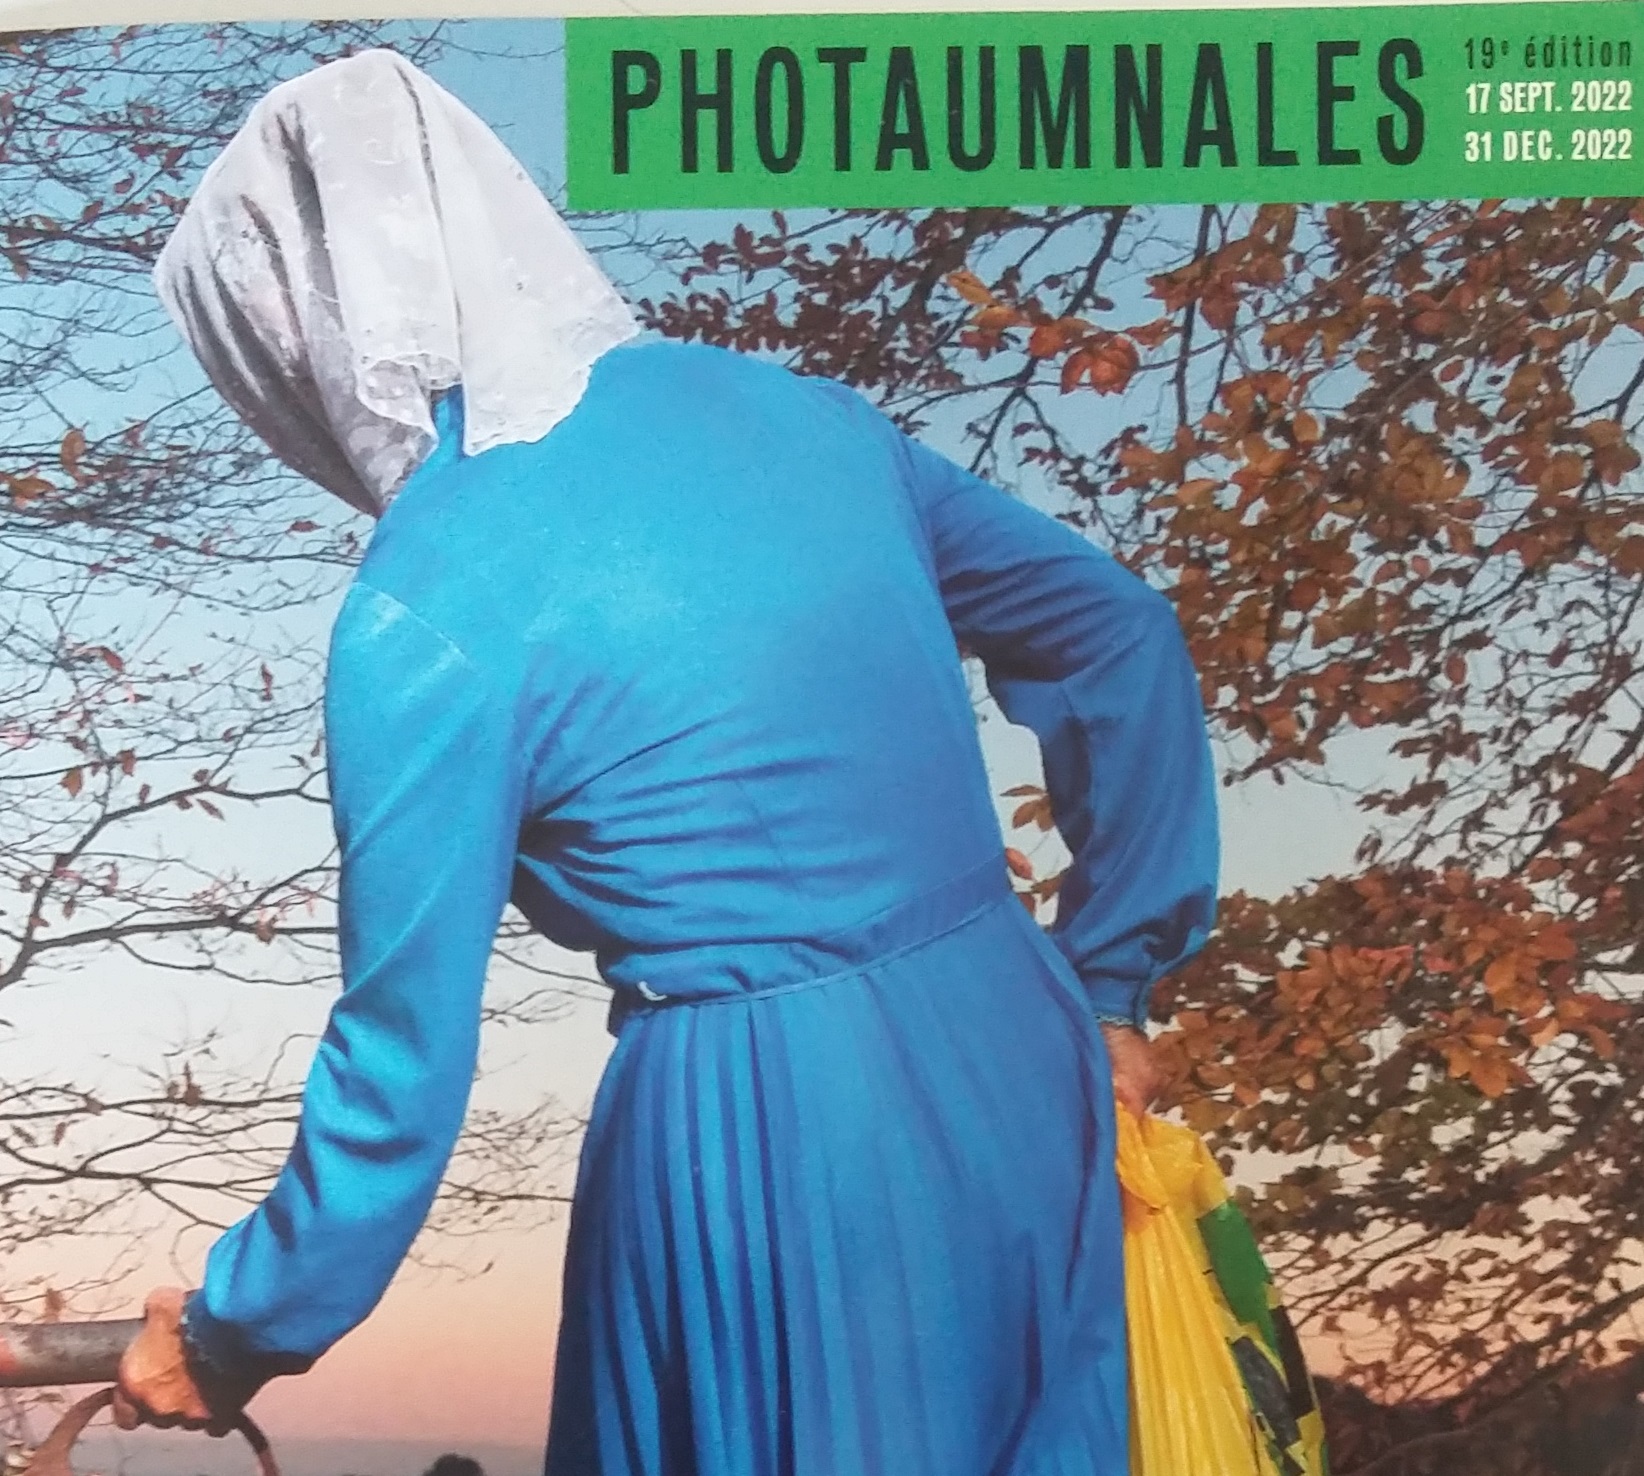 You are currently viewing Les photaumnales